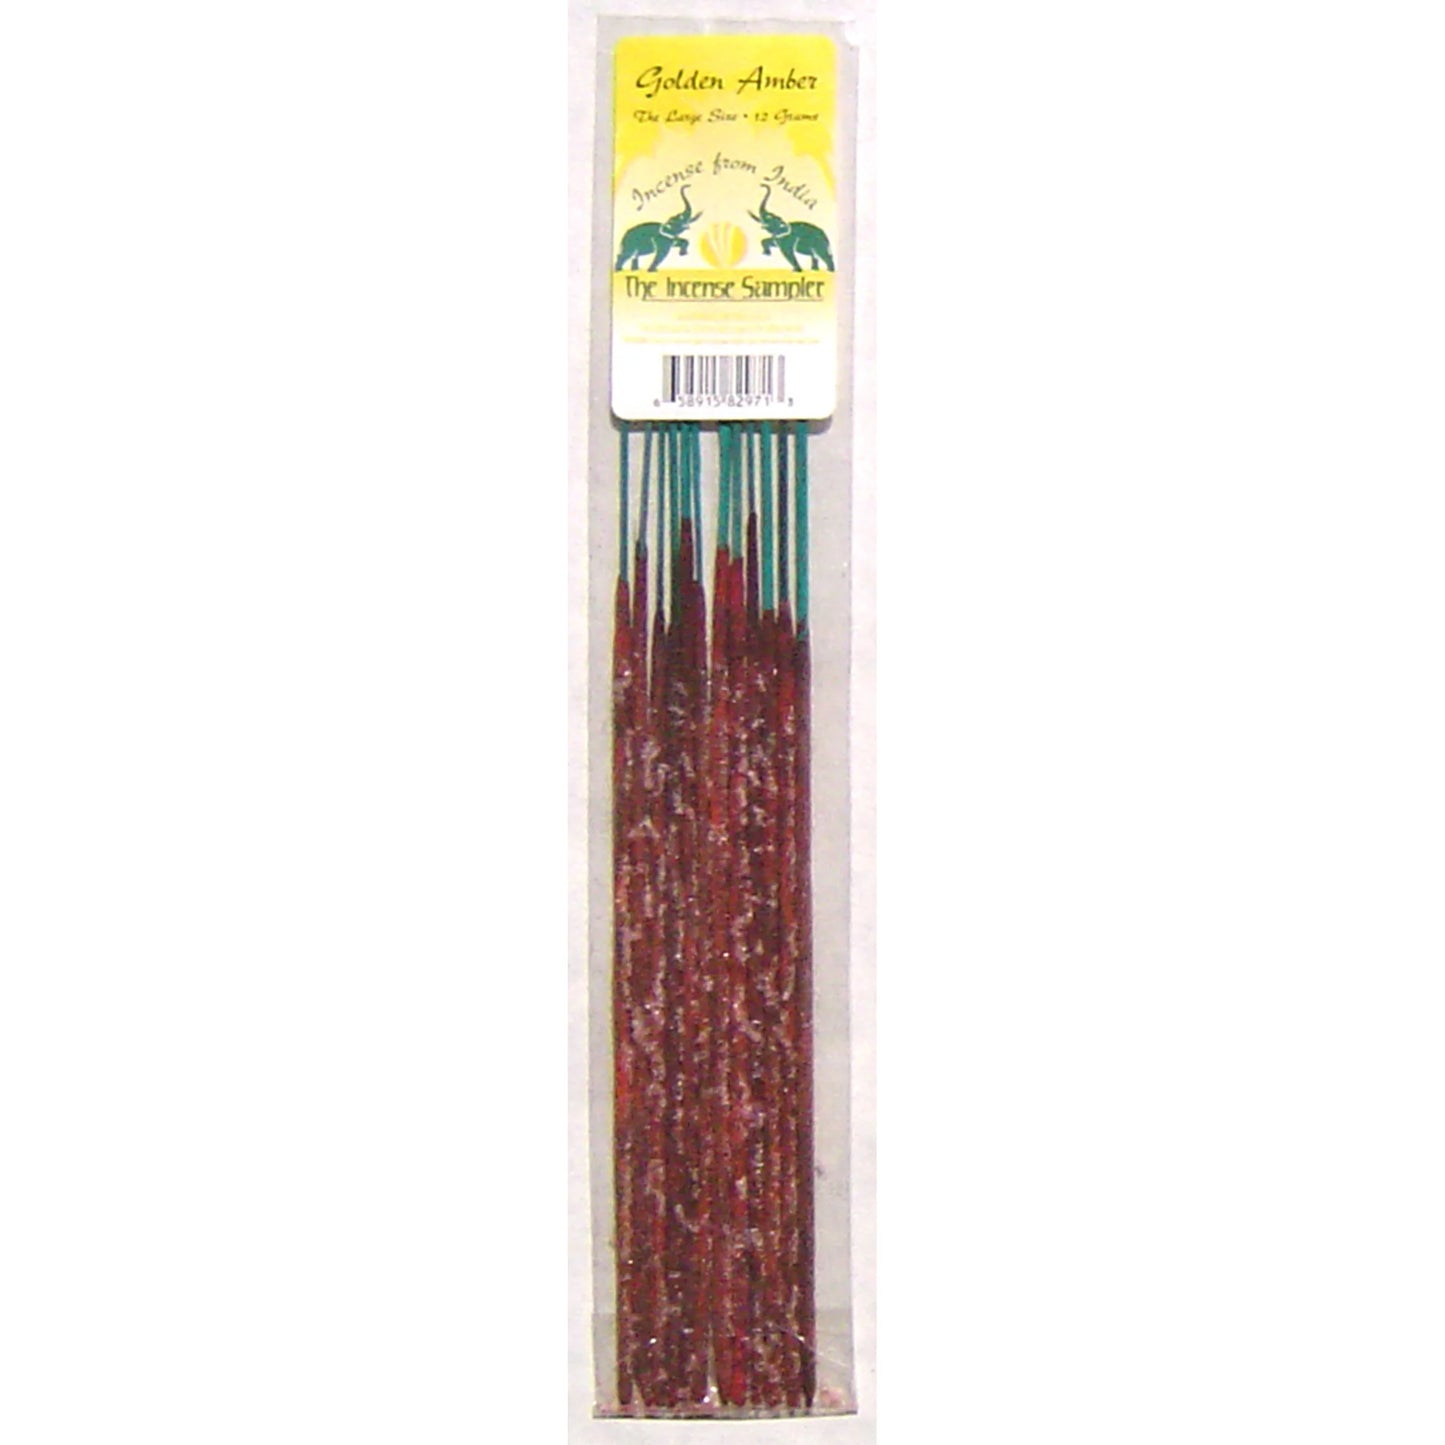 Incense From India - Golden Amber